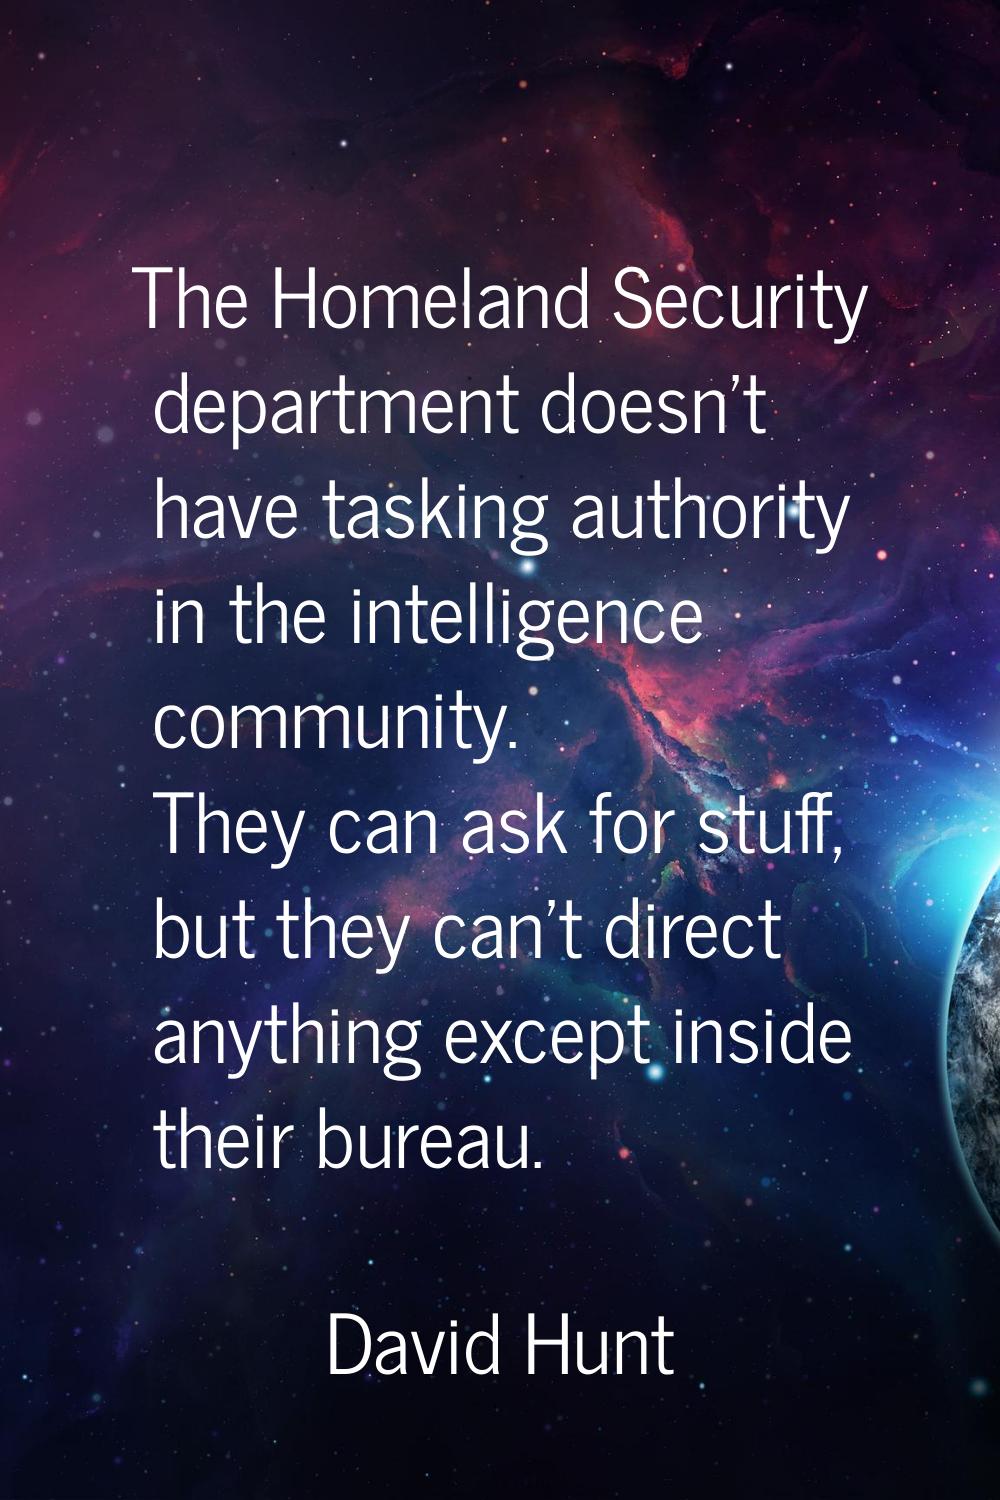 The Homeland Security department doesn't have tasking authority in the intelligence community. They